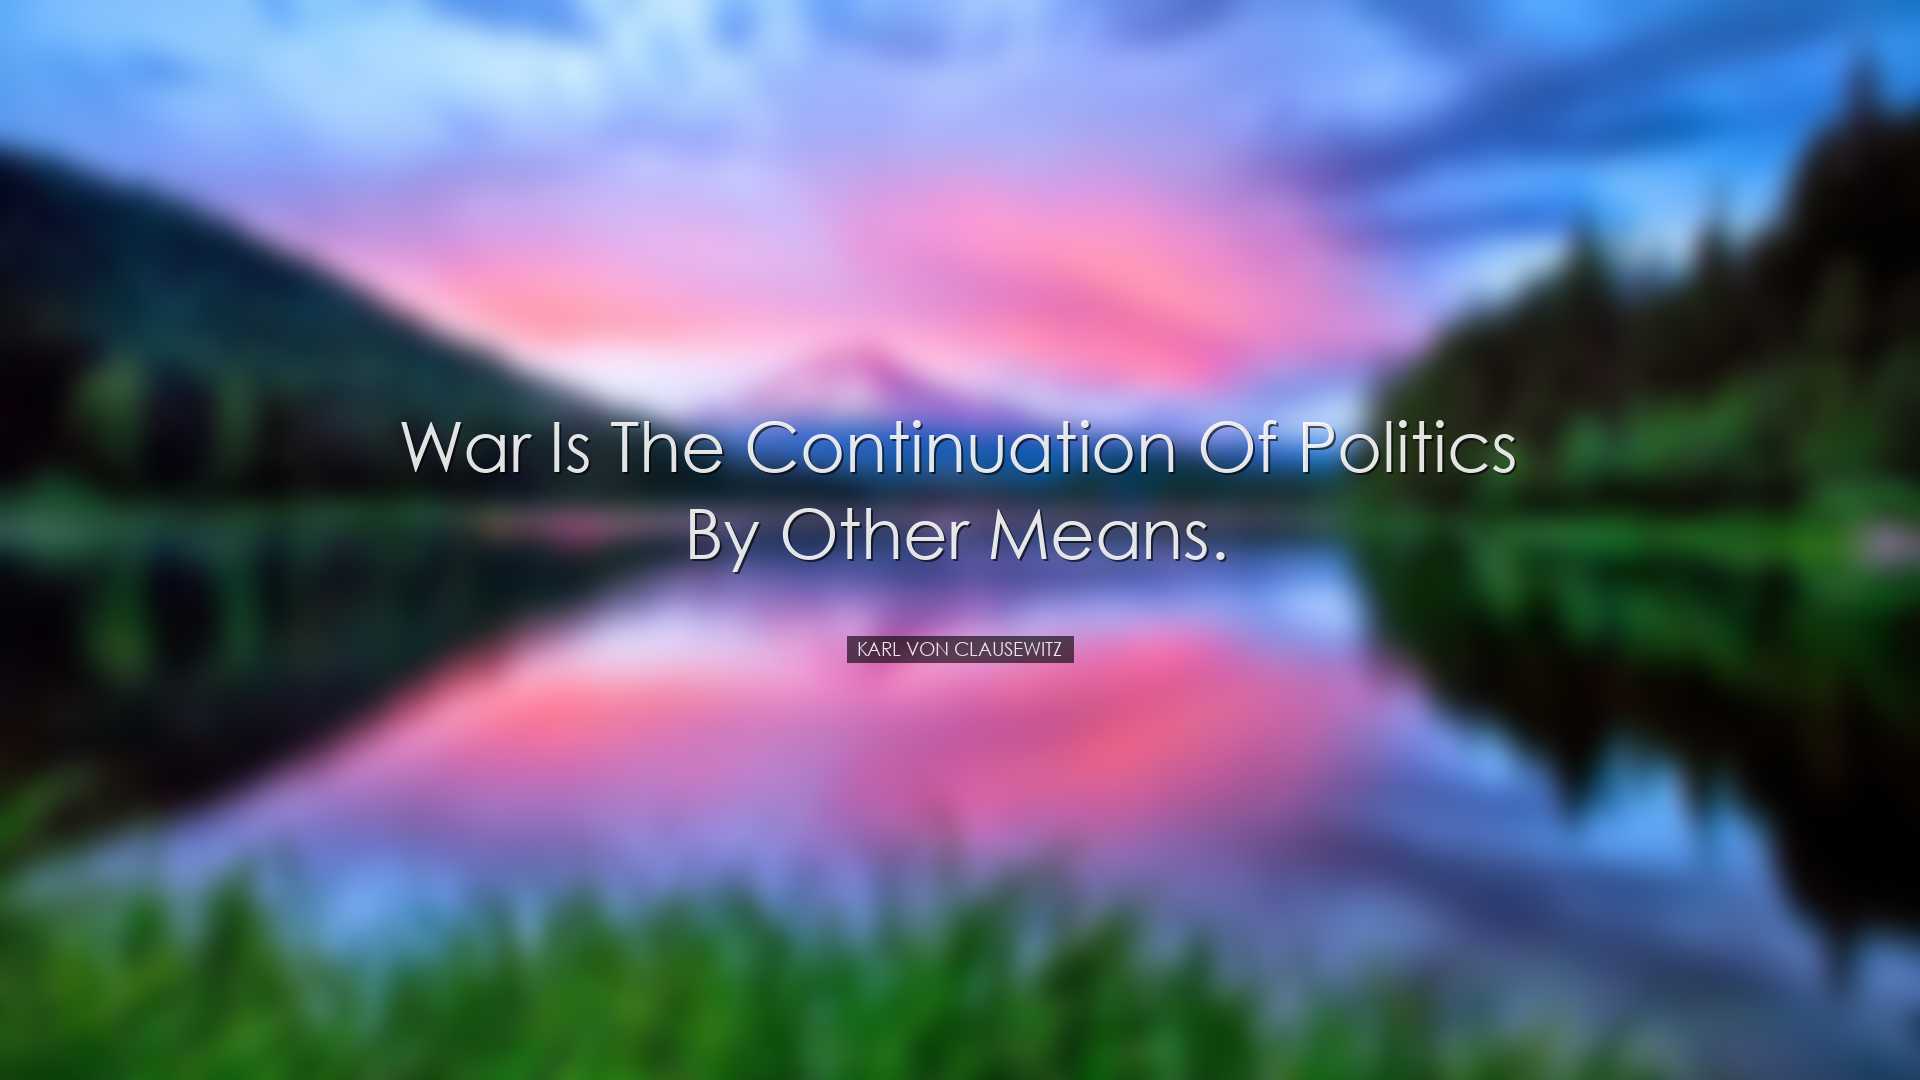 War is the continuation of politics by other means. - Karl Von Cla